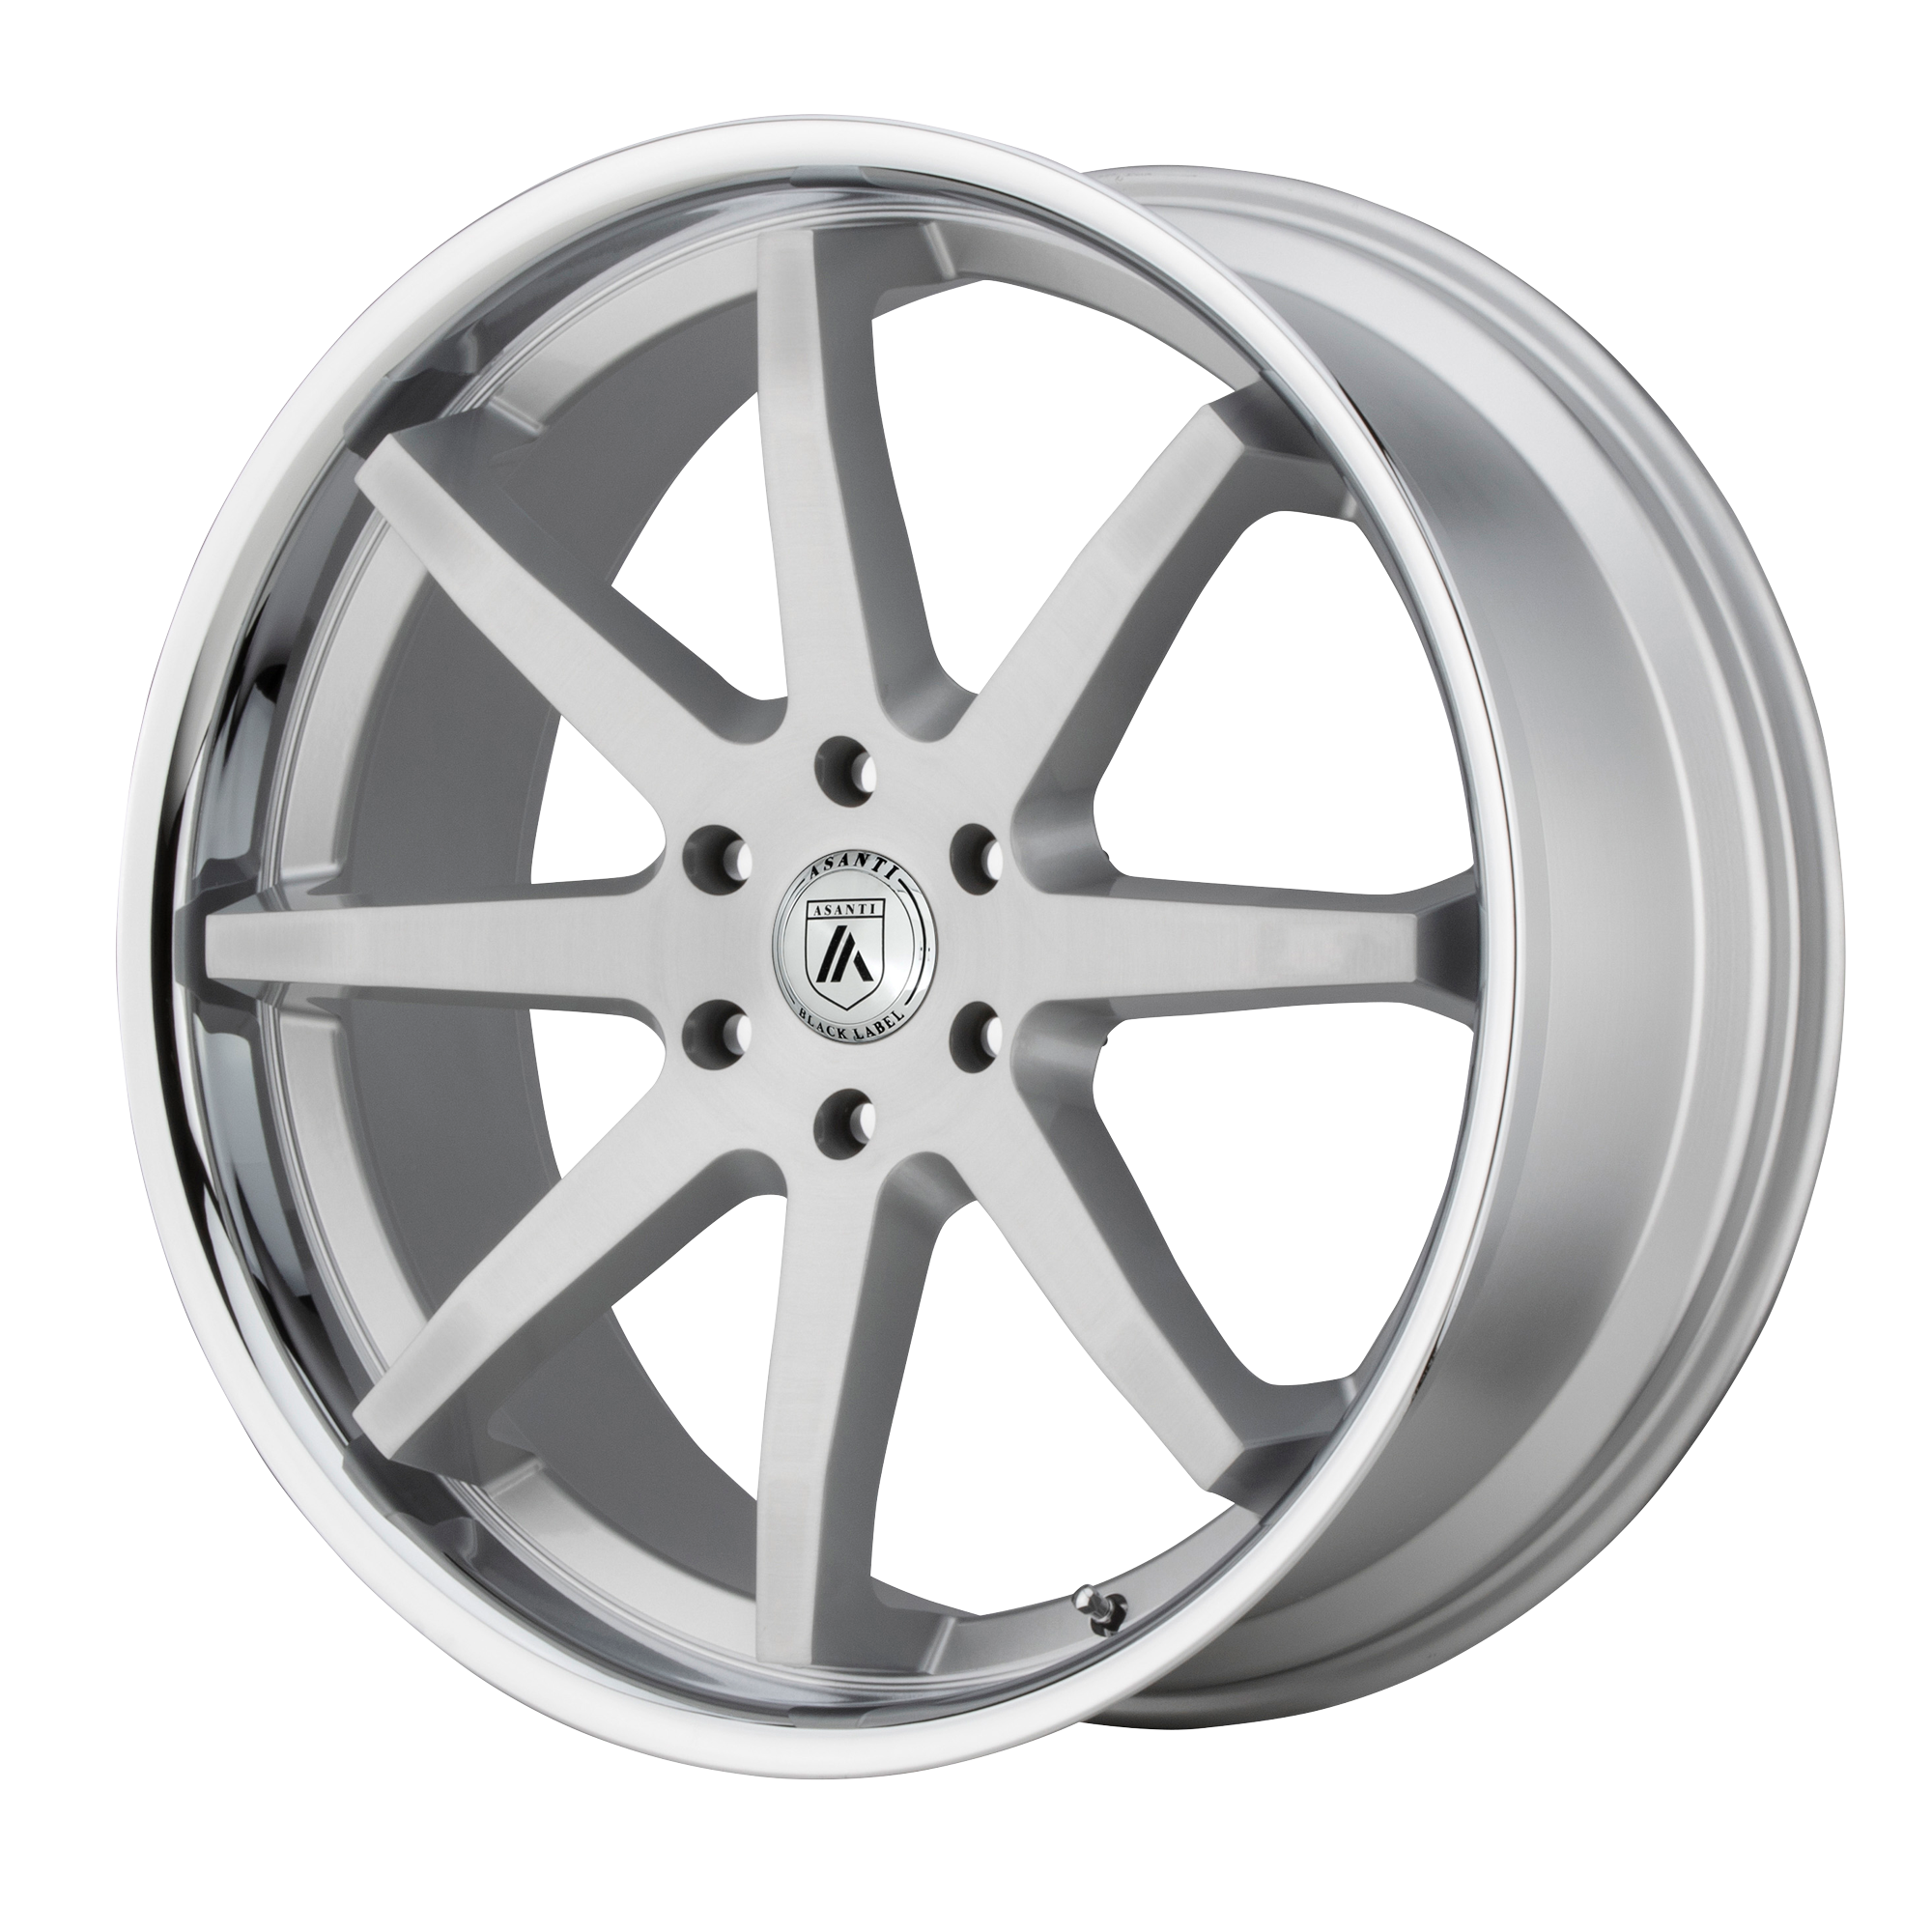 KAISER 24x10 6x135.00 BRUSHED SILVER W/ CHROME LIP (30 mm) - Tires and Engine Performance